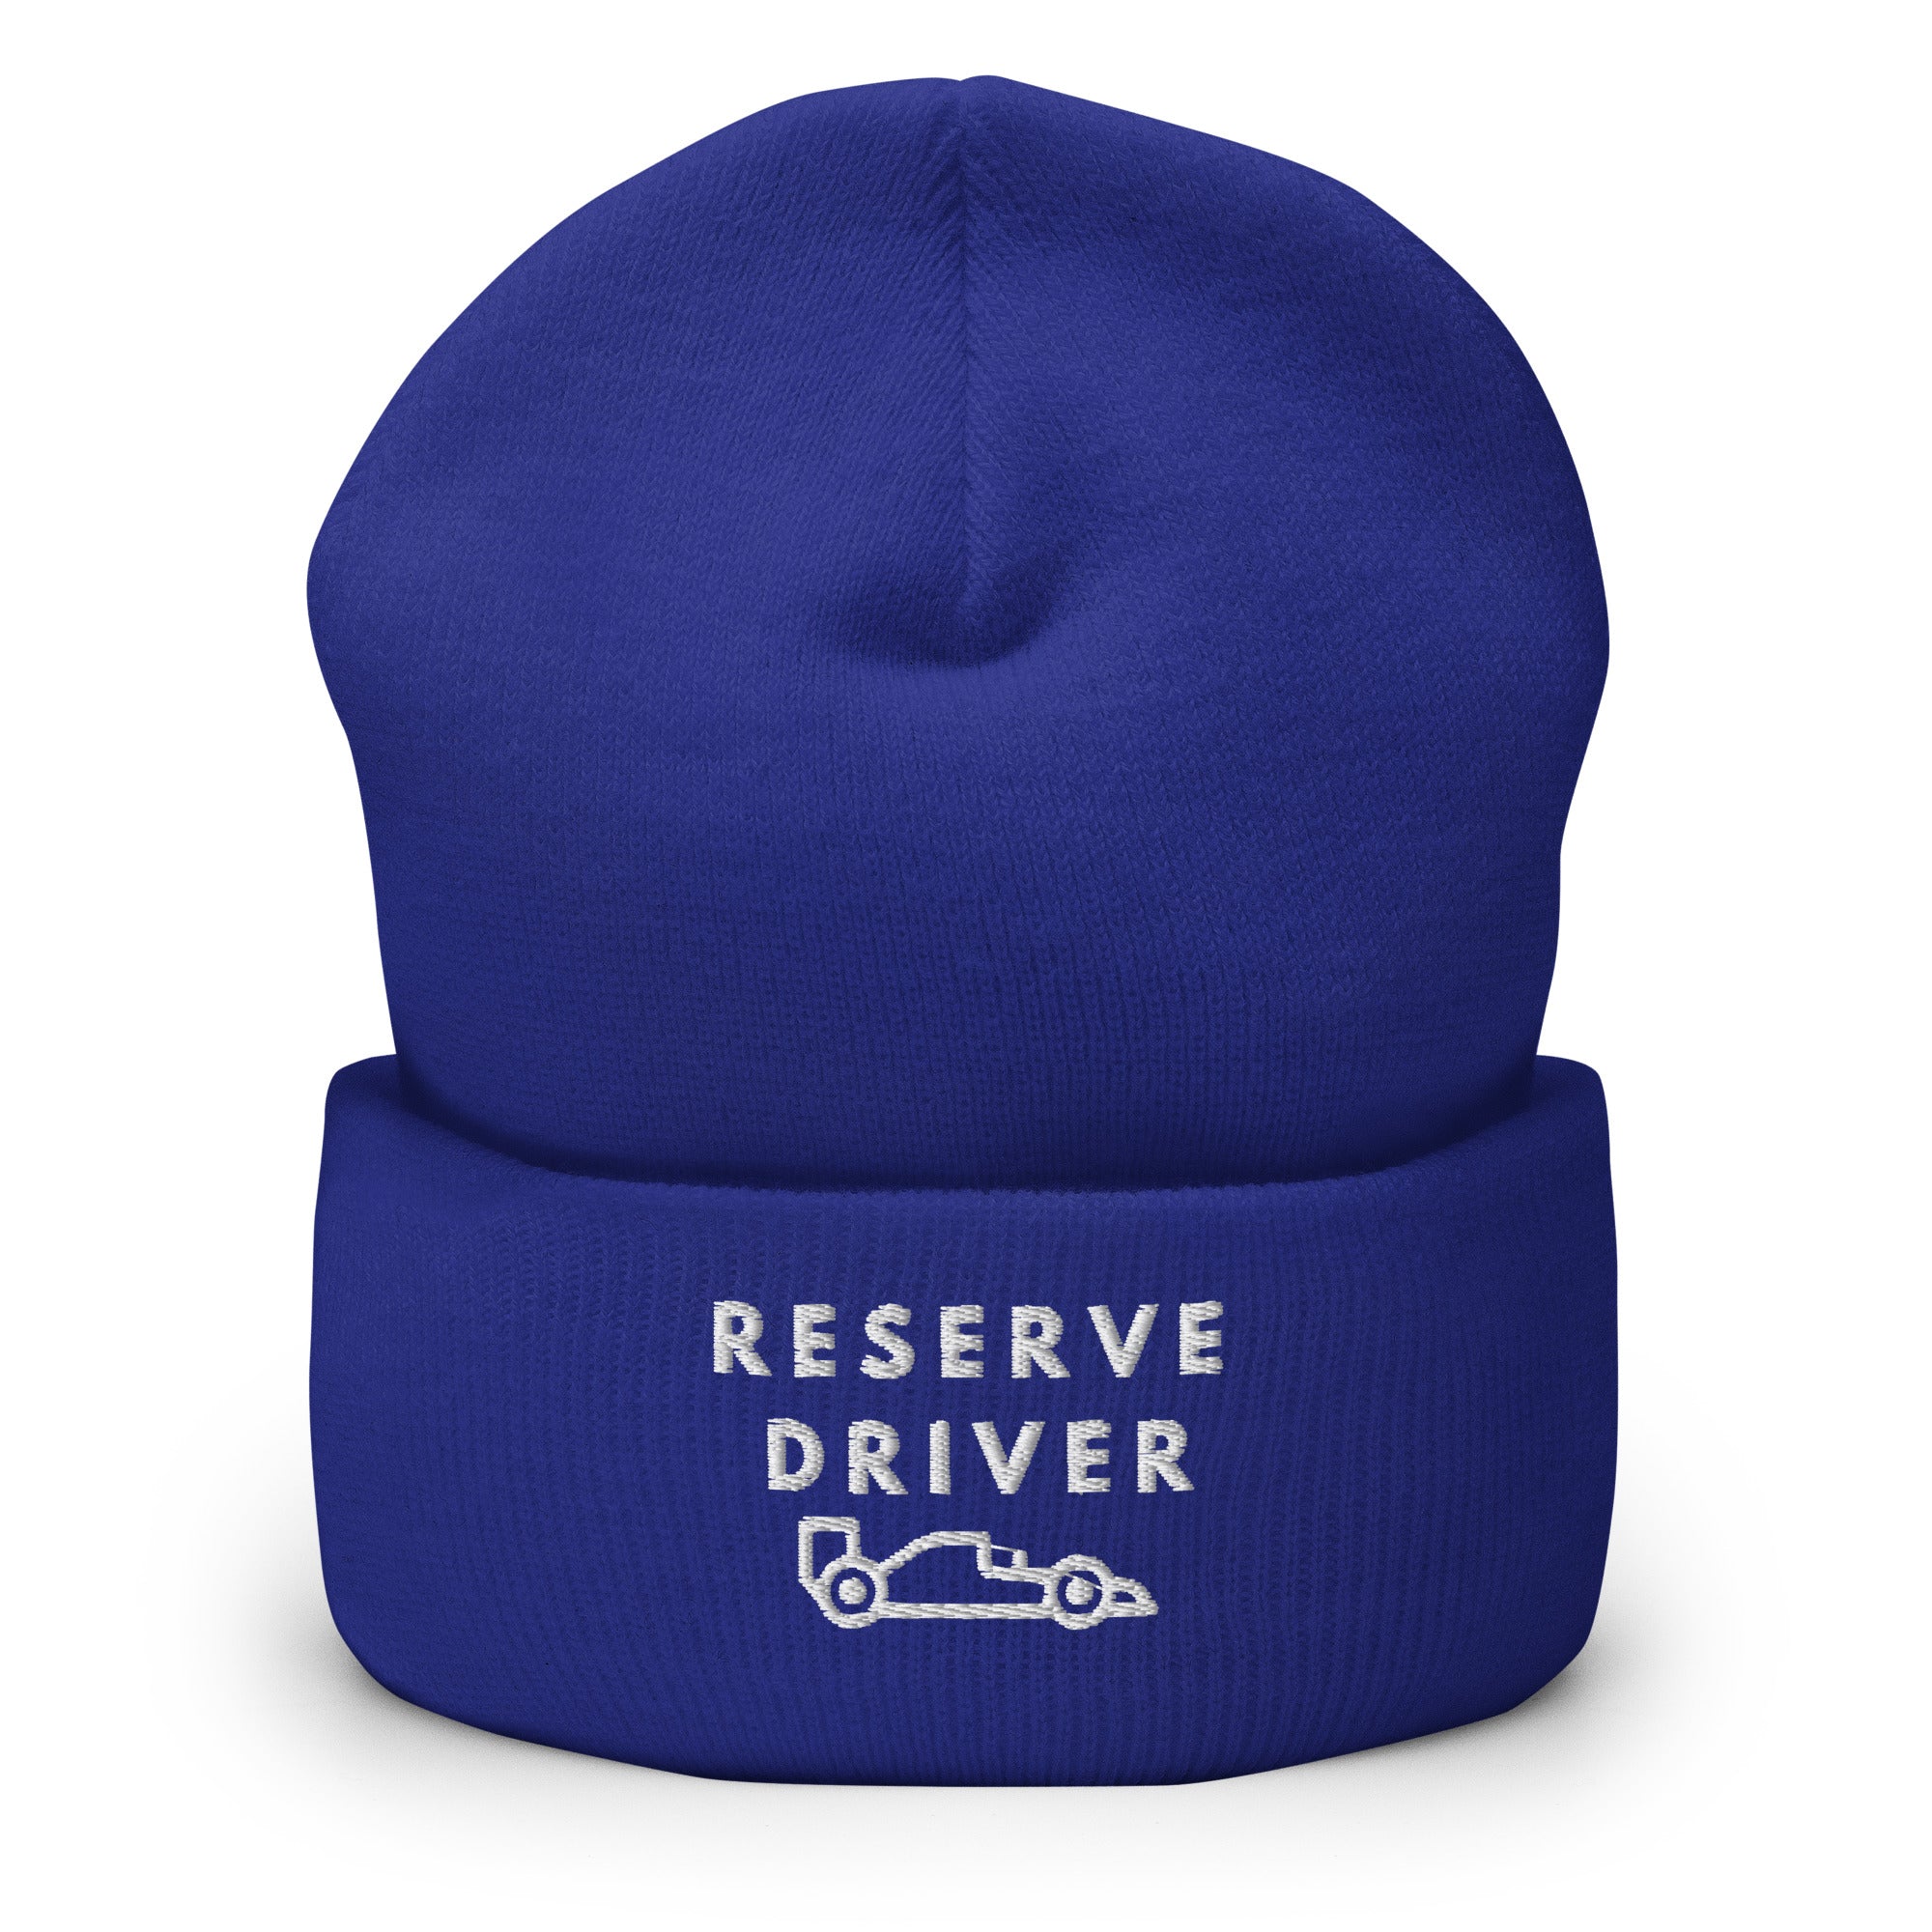 Reserve Driver Embroidered Cuffed Beanie